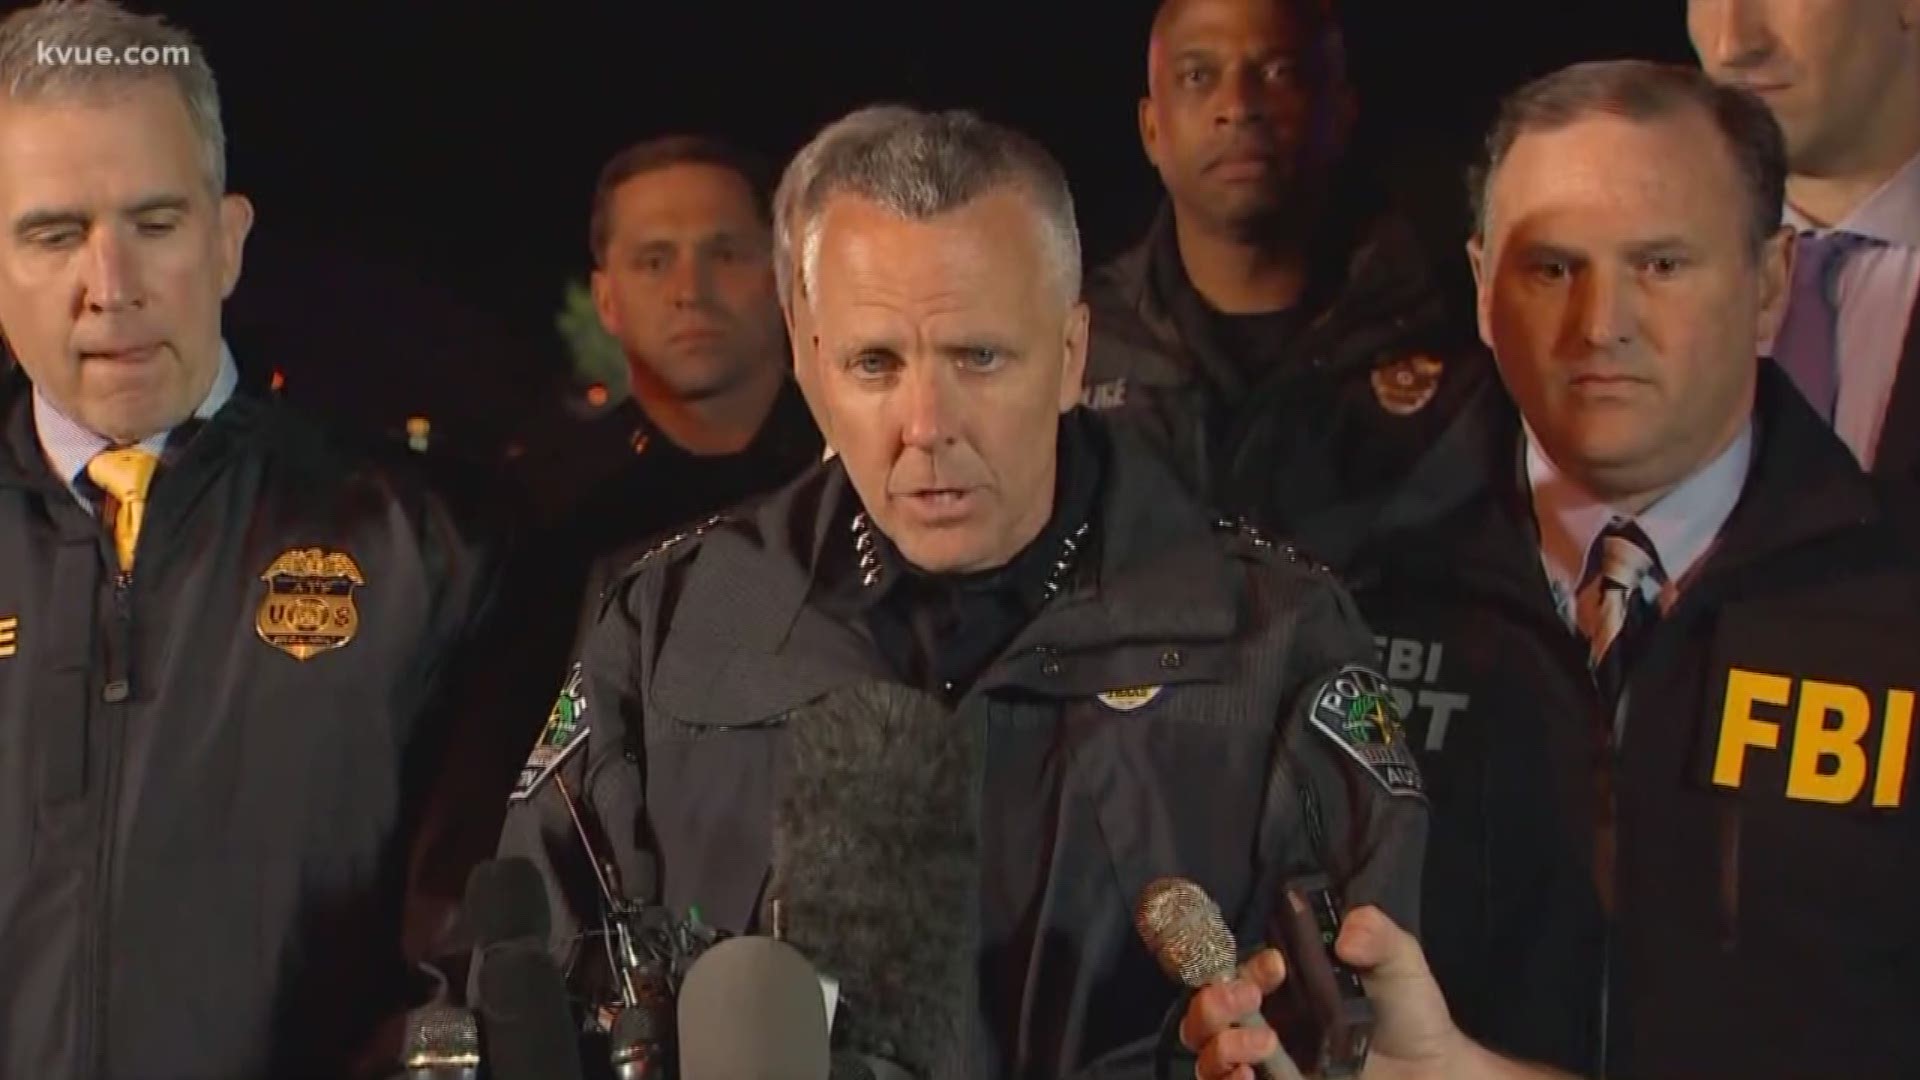 Austin Police Chief Brian Manley confirms that the bombing suspect died early Wednesday morning after he detonated a device inside of his vehicle following a police chase.